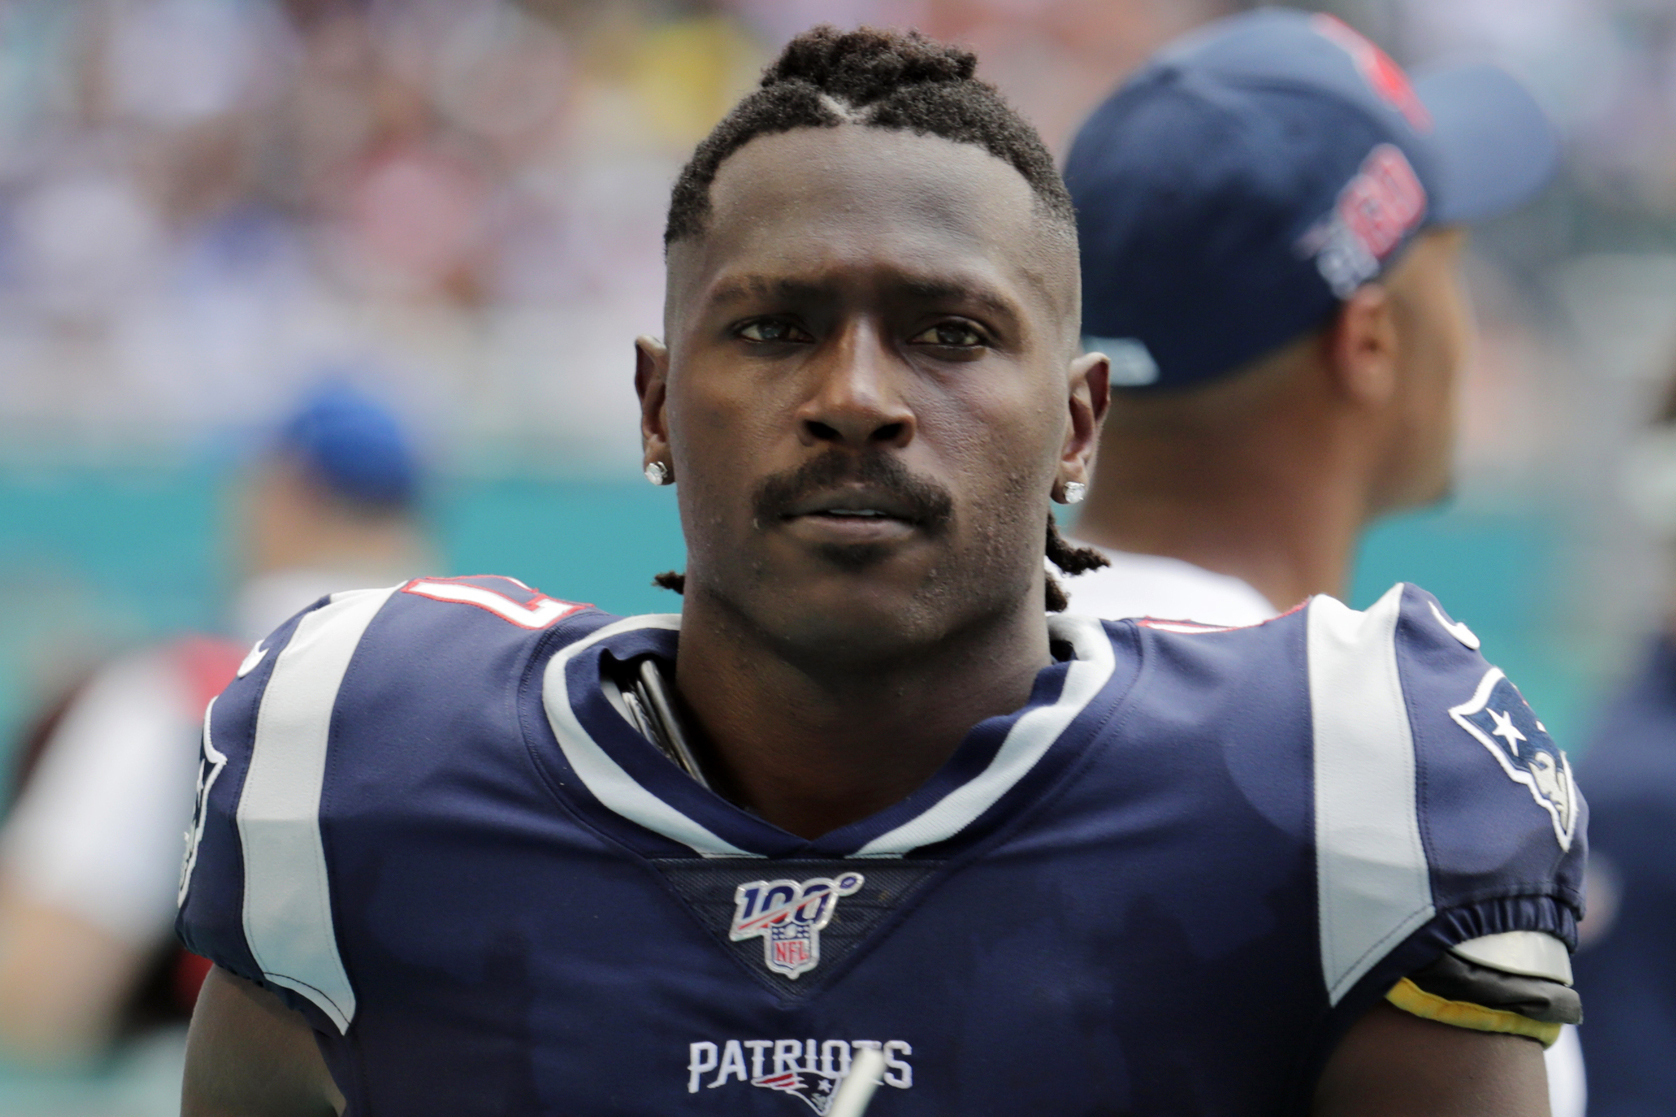 PHOTO: In this Sunday, Sept. 15, 2019, file photo, New England Patriots wide receiver Antonio Brown on the sidelines,during the first half at an NFL football game against the Miami Dolphins in Miami Gardens, Fla.